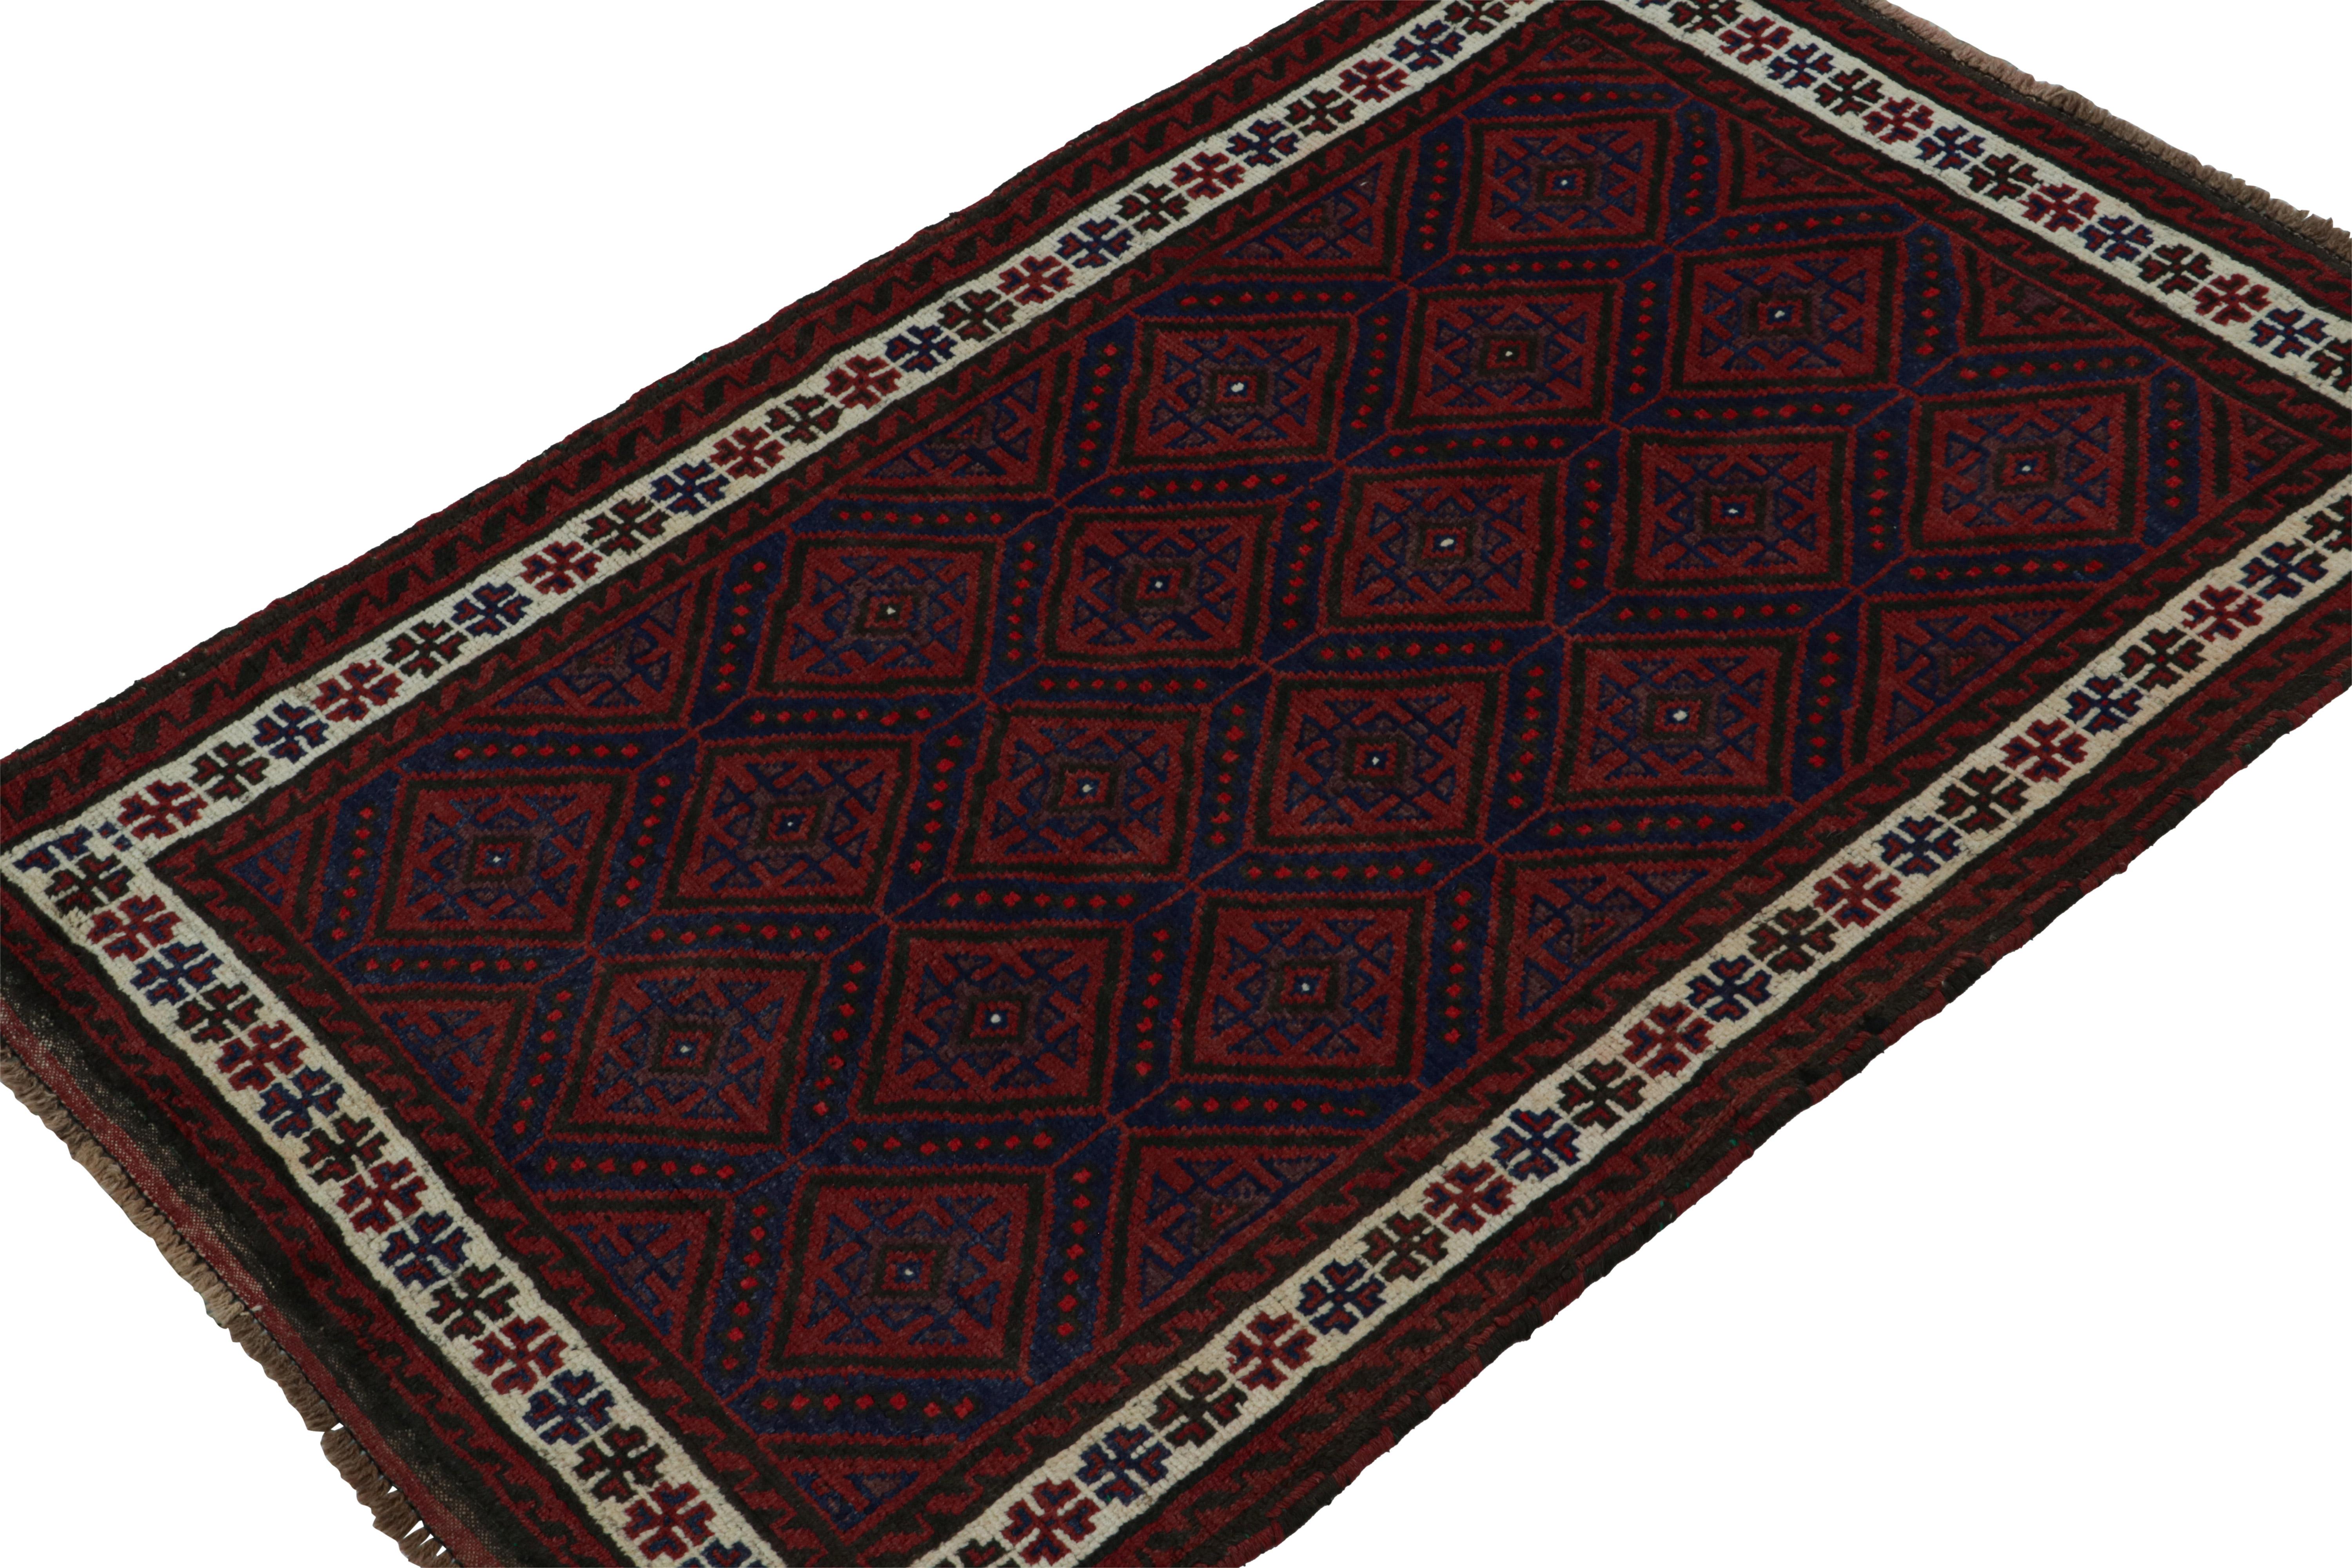 Hand-knotted in wool & goat hair, this vintage tribal rug of the 1950s is a coveted addition to Rug & Kilim’s Antique & Vintage collection. 

On the Design:

Coming from the Baluch tribe, this 4x6 rug boasts traditional patterns in rich red & navy